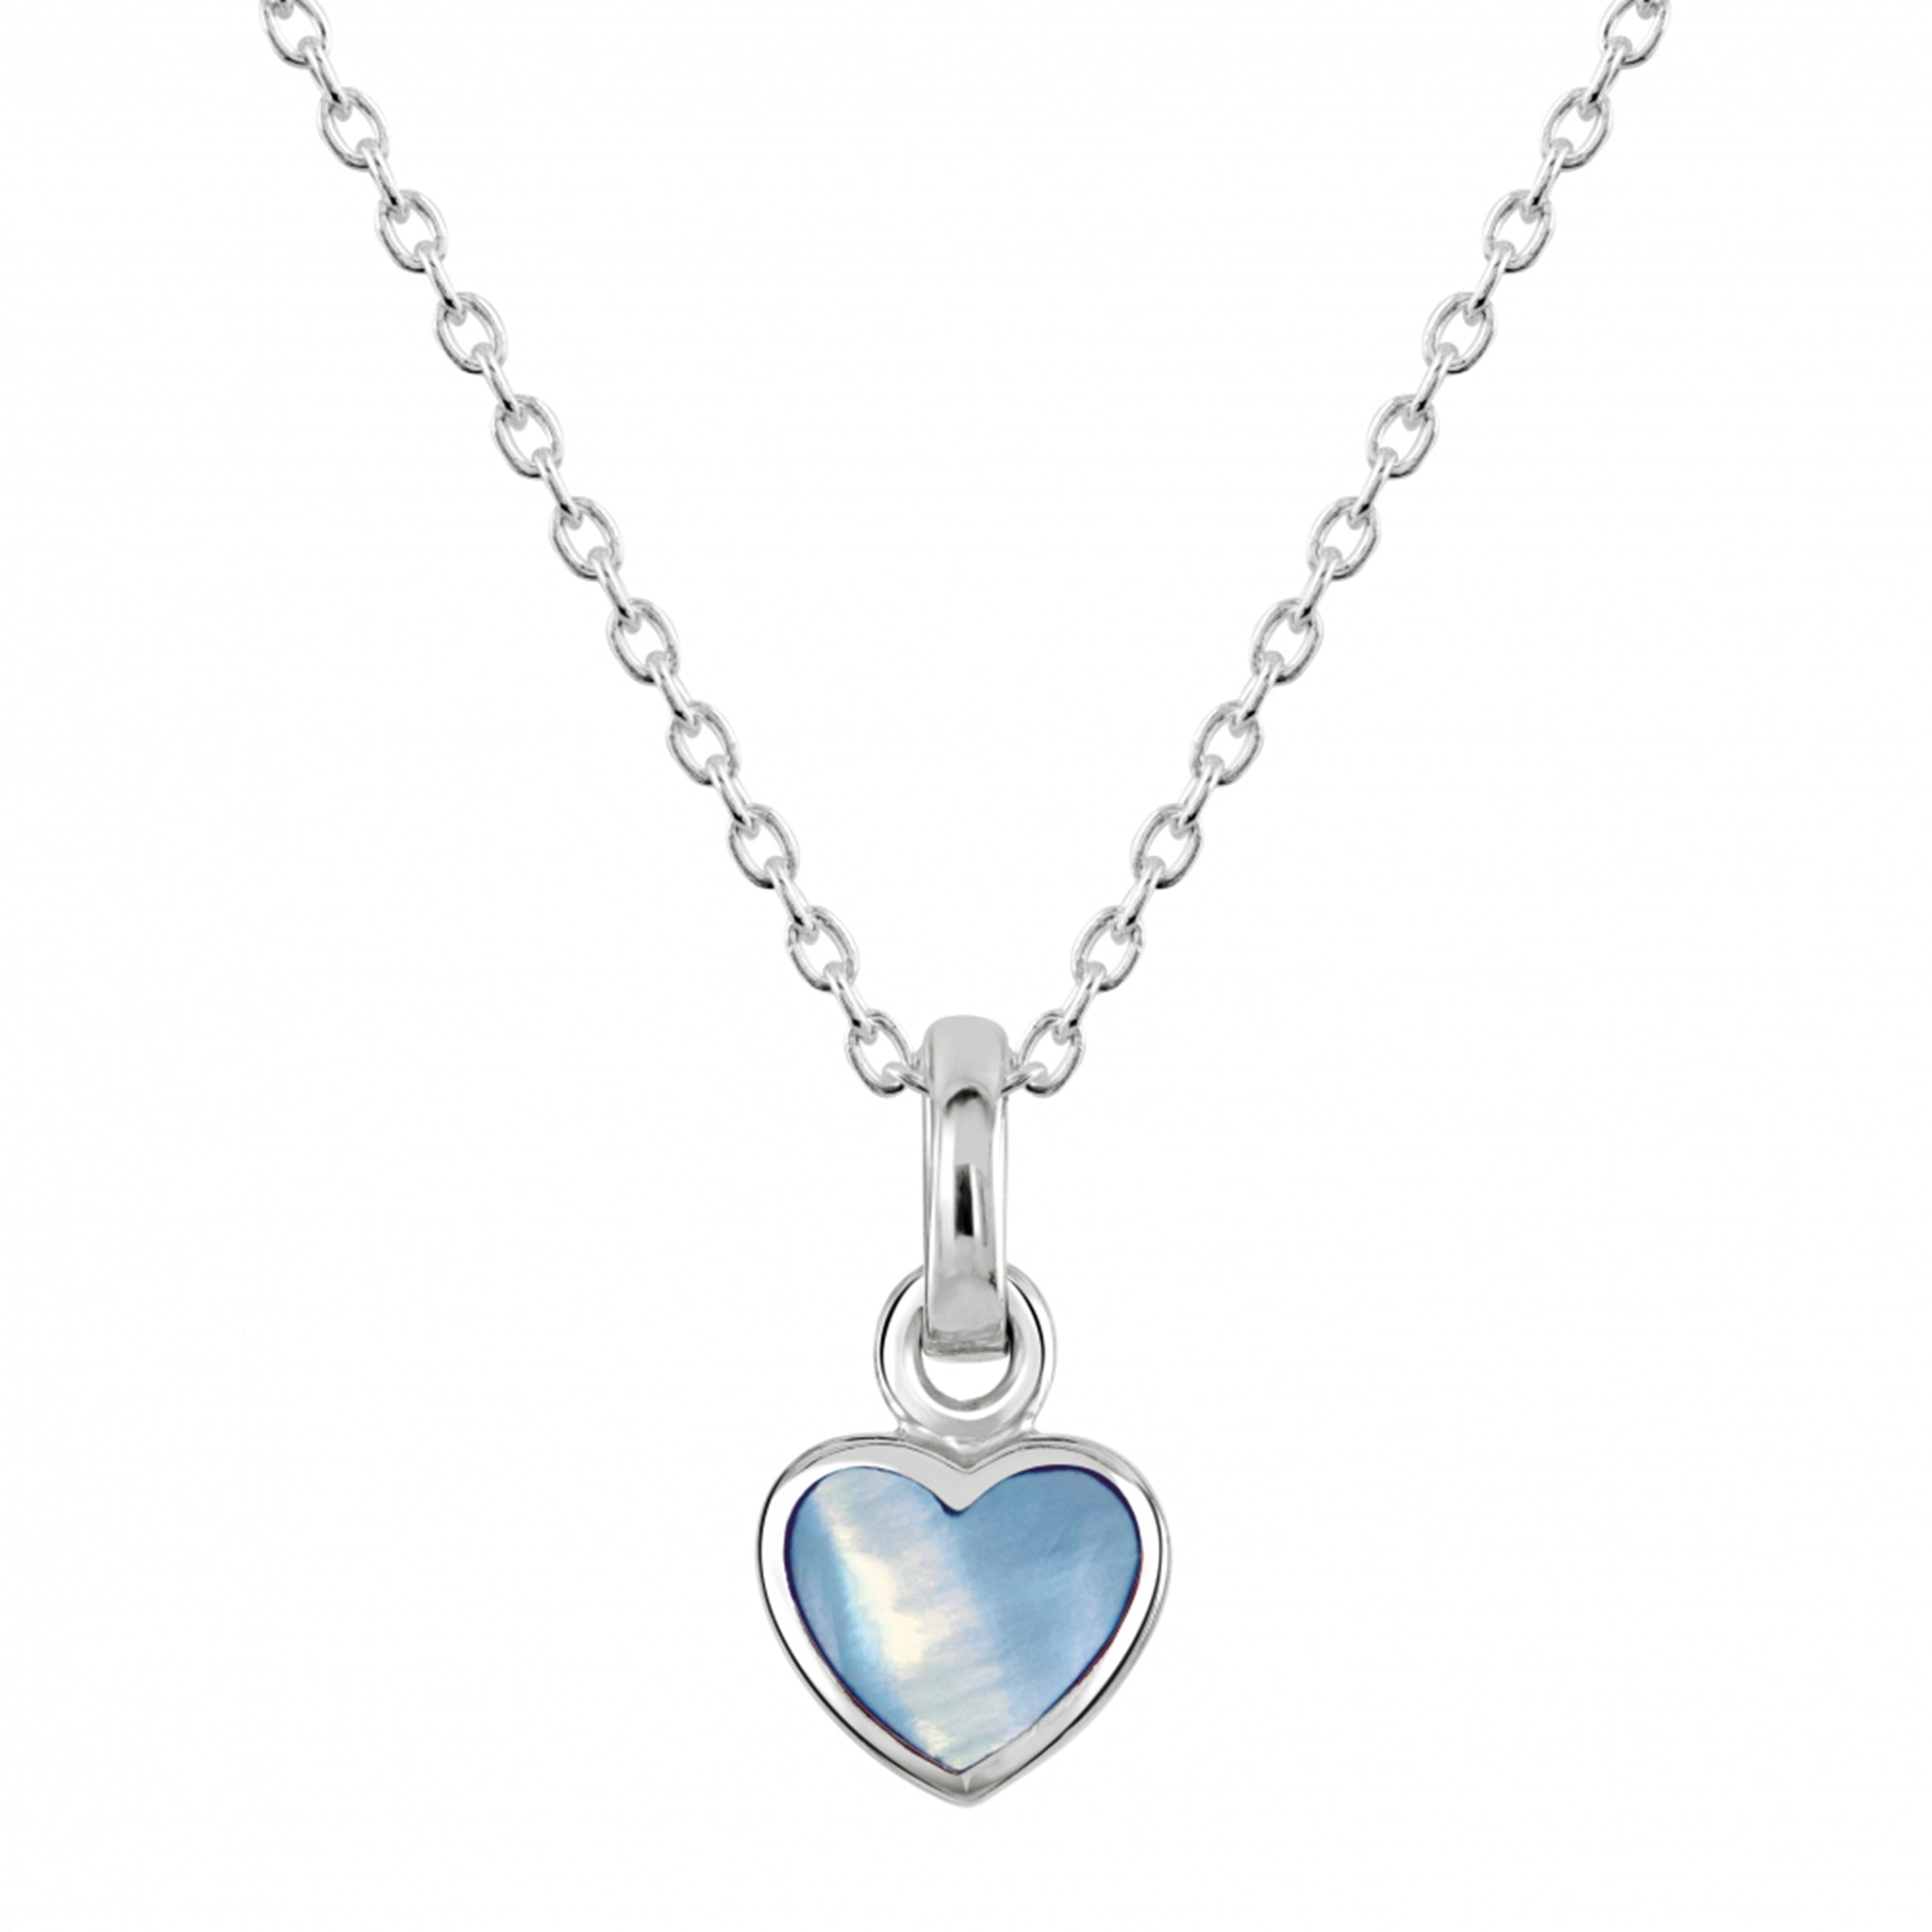 A silver heart pendant with blue mother of pearl stone